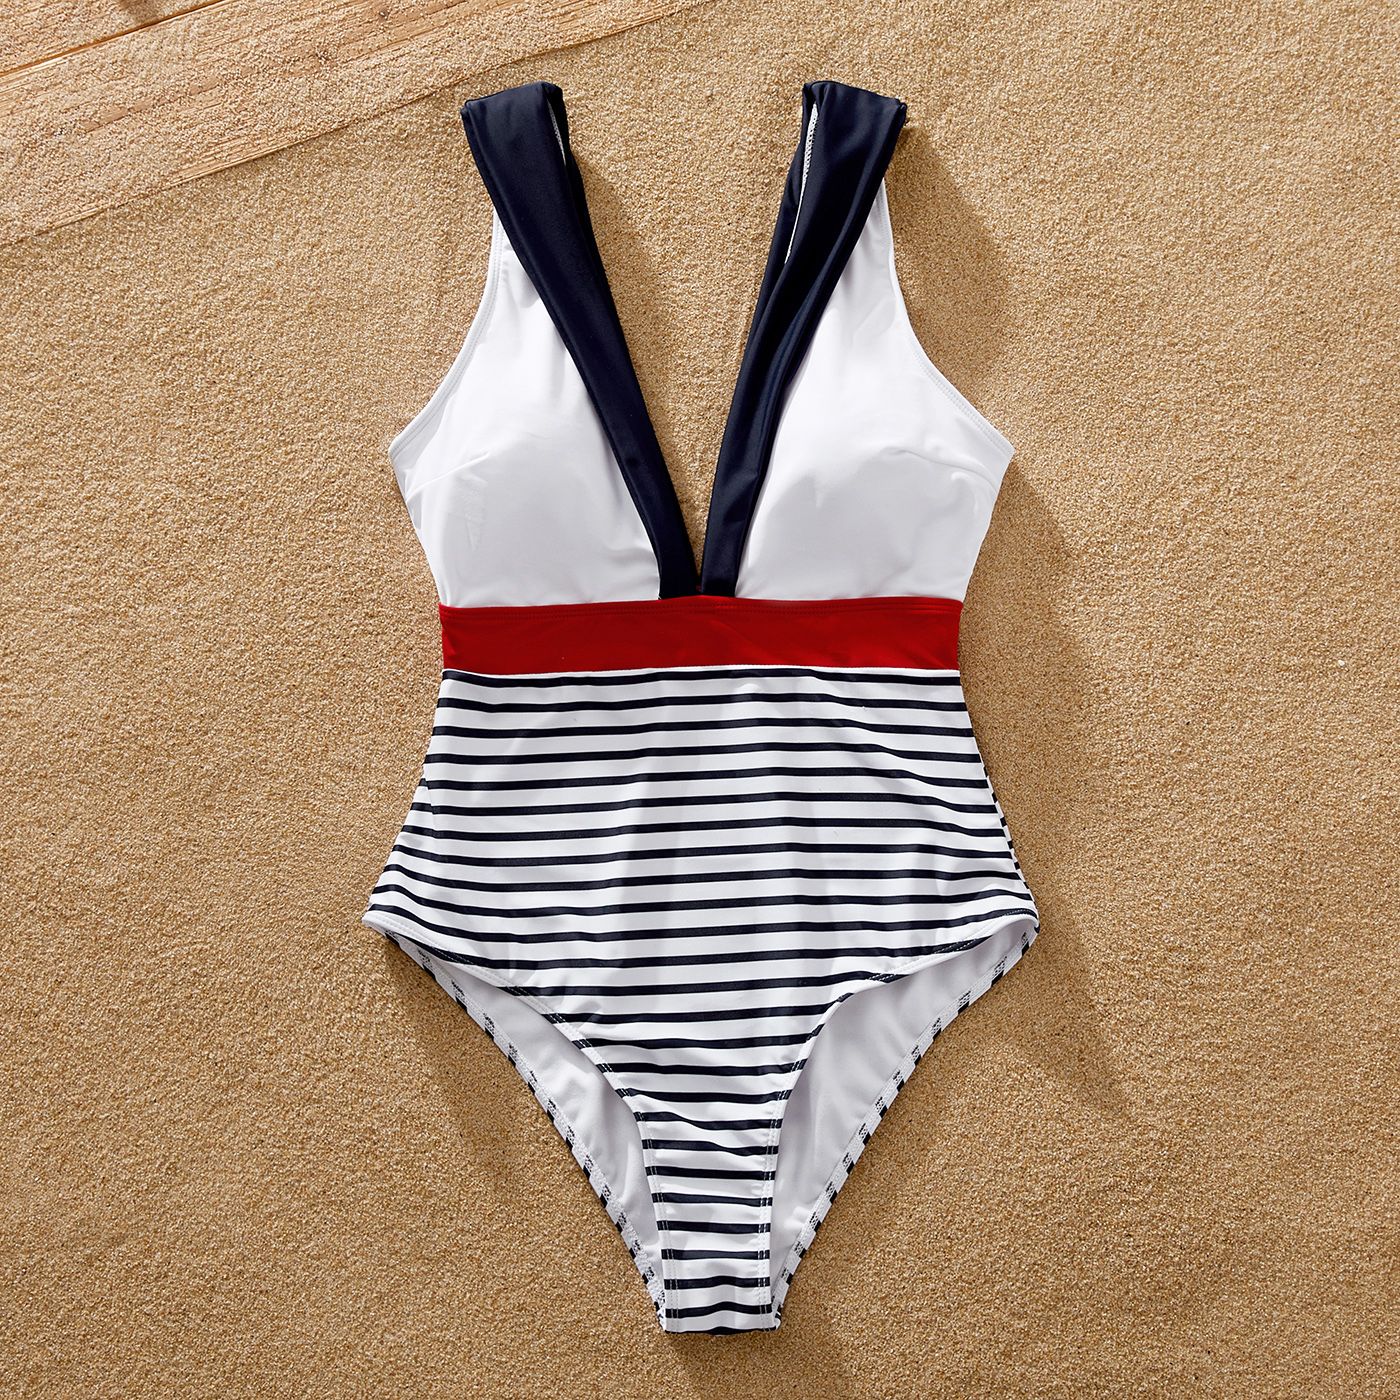 family matching striped print one-piece swimsuit or swim trunks shorts